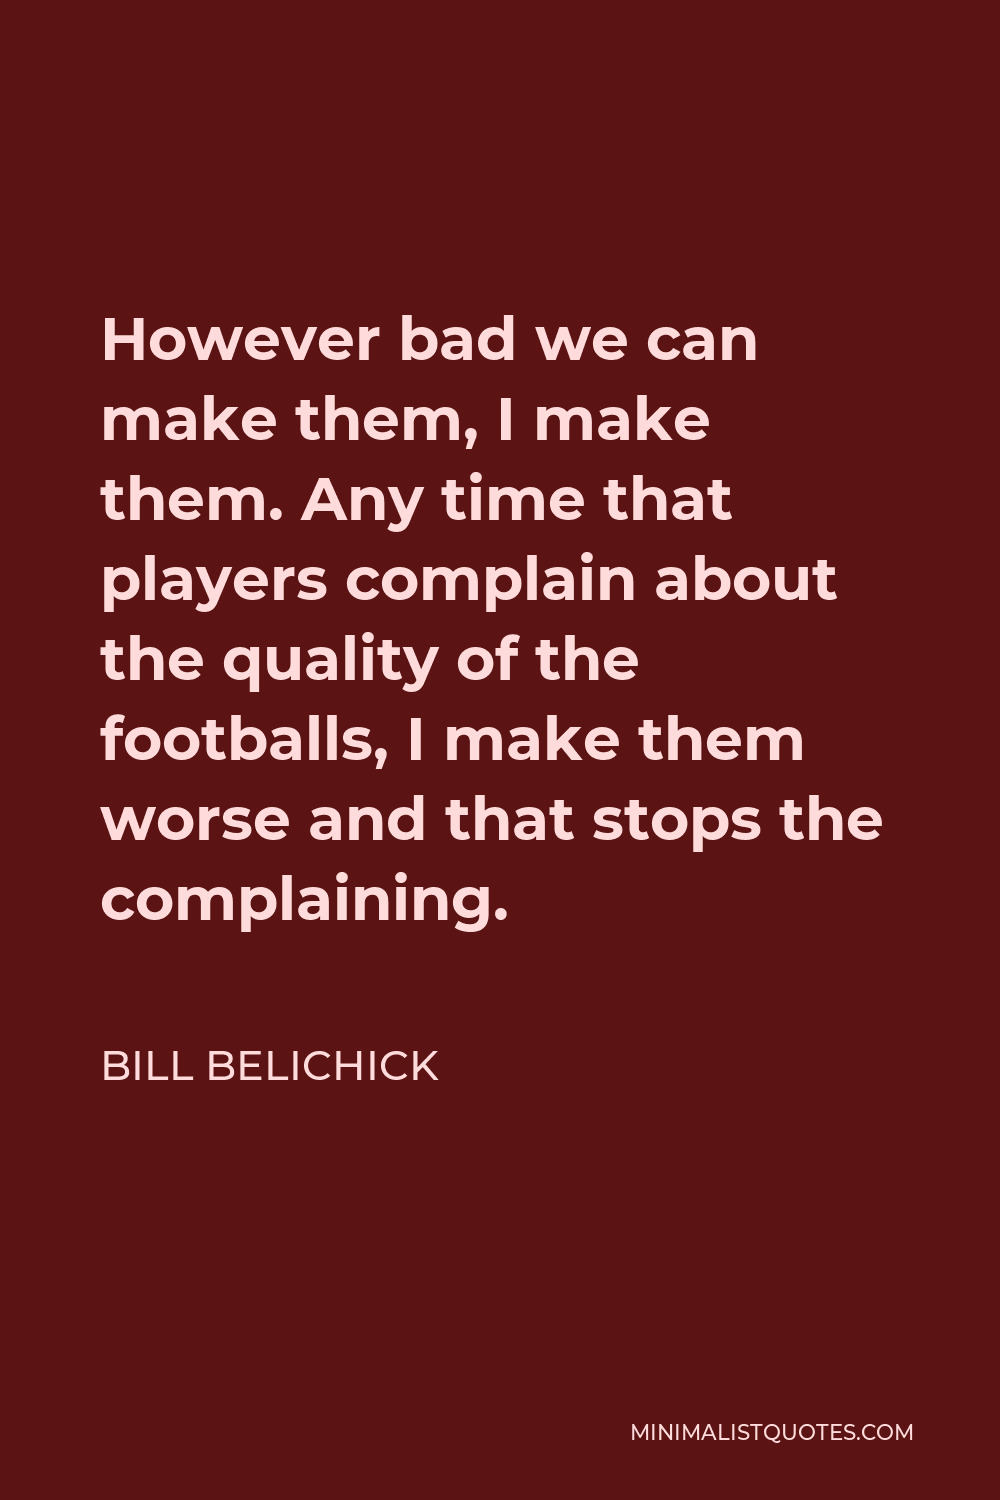 Bill Belichick Quote - However bad we can make them, I make them. Any time that players complain about the quality of the footballs, I make them worse and that stops the complaining.